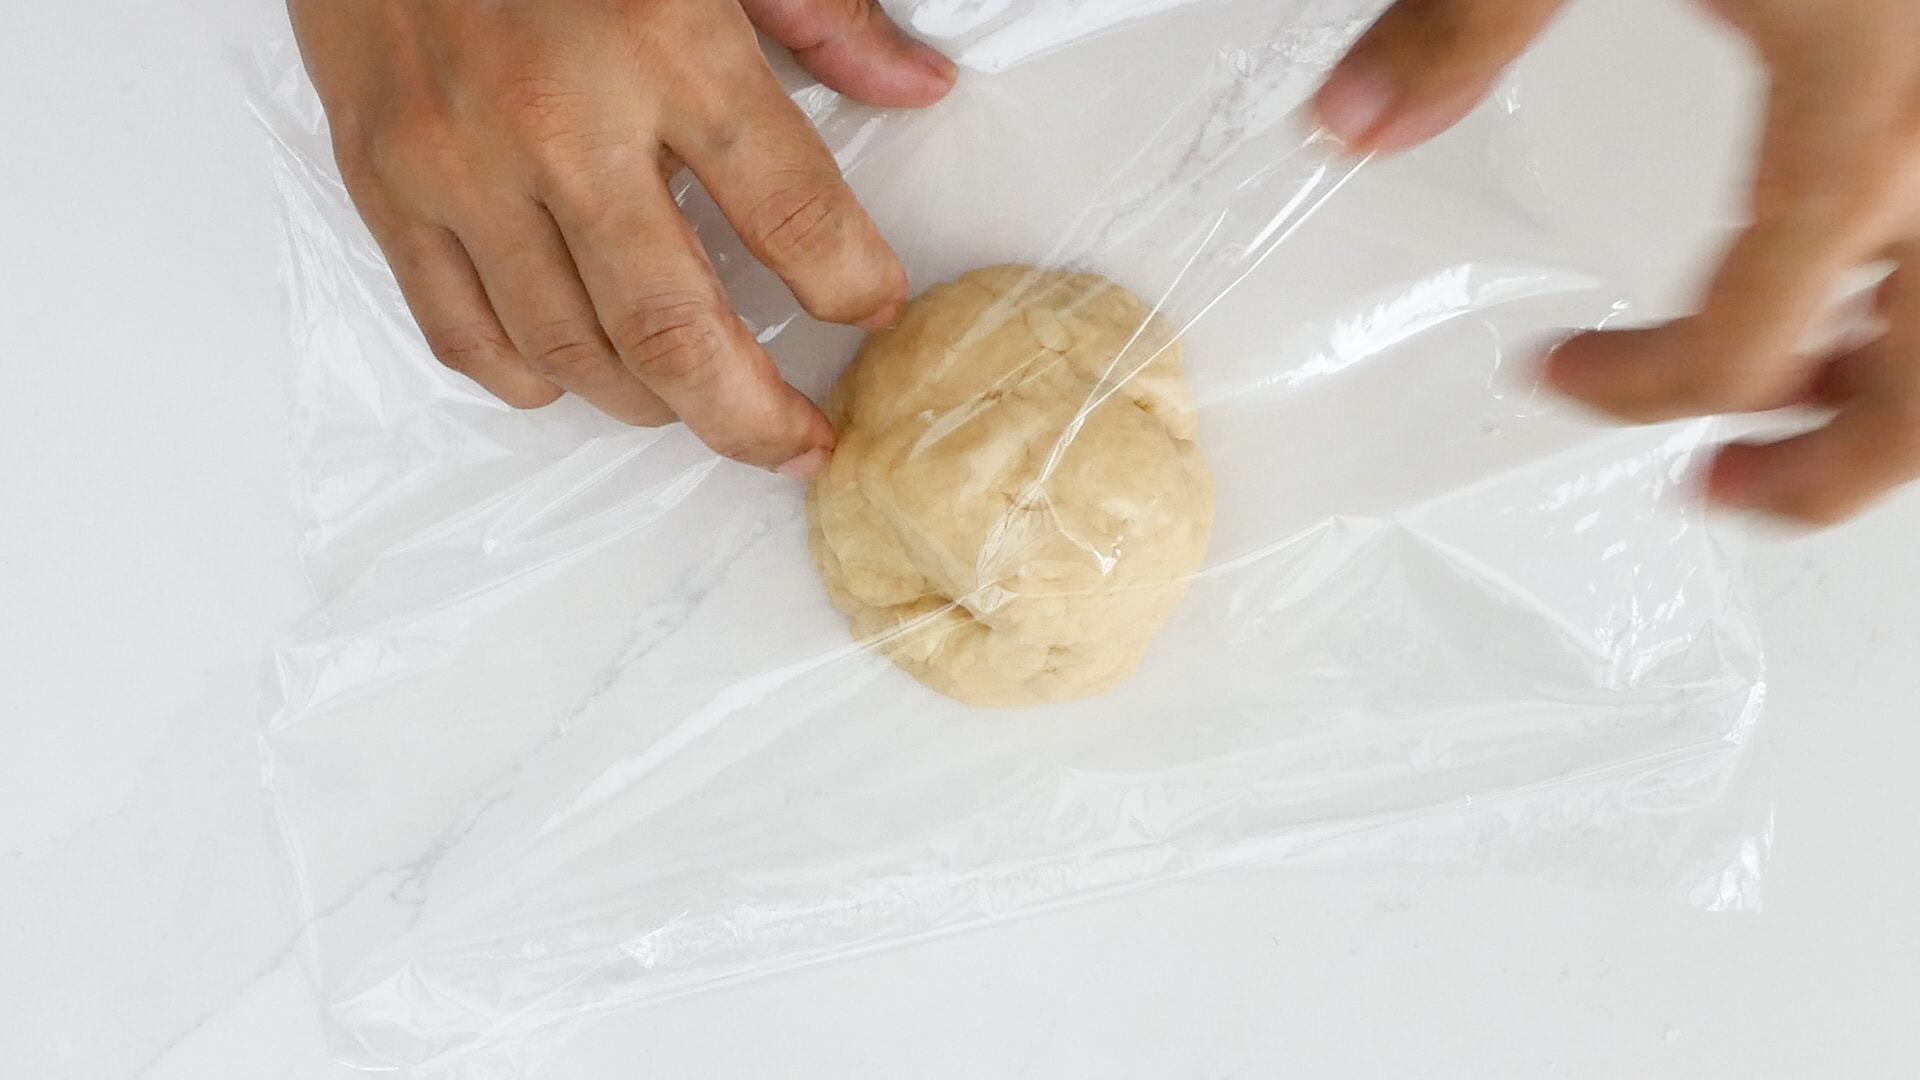 Wrapping dough in plastic film